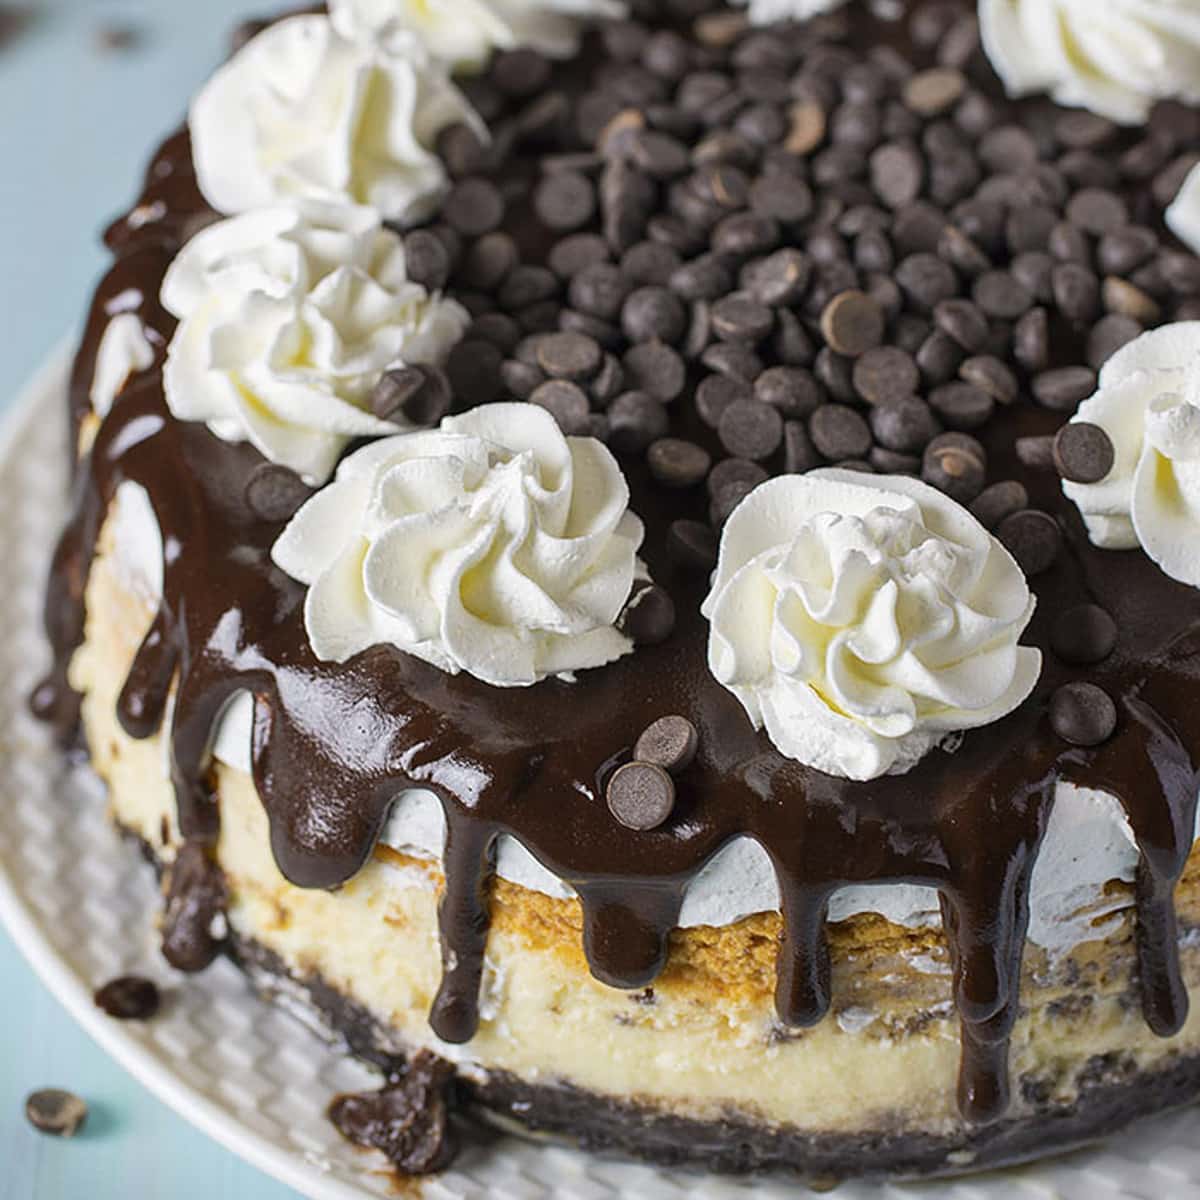 Fall dessert recipes - double layer pumpkin cheesecake topped with chocolate and whipped cream.